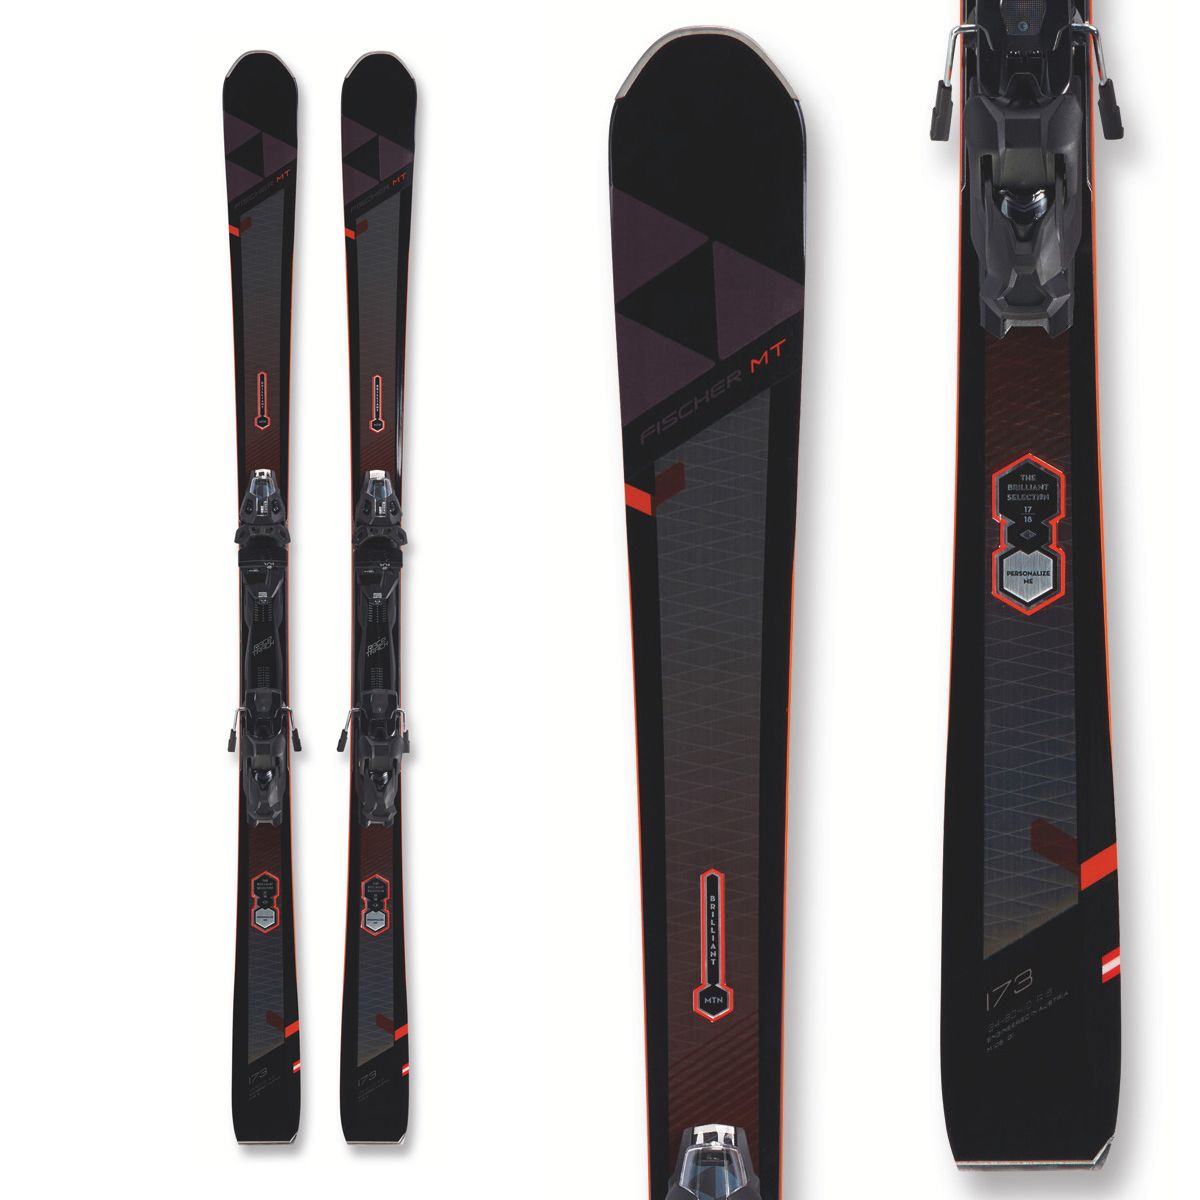 Pack skis BRILLIANT 80 MT + Fixation MBS 12